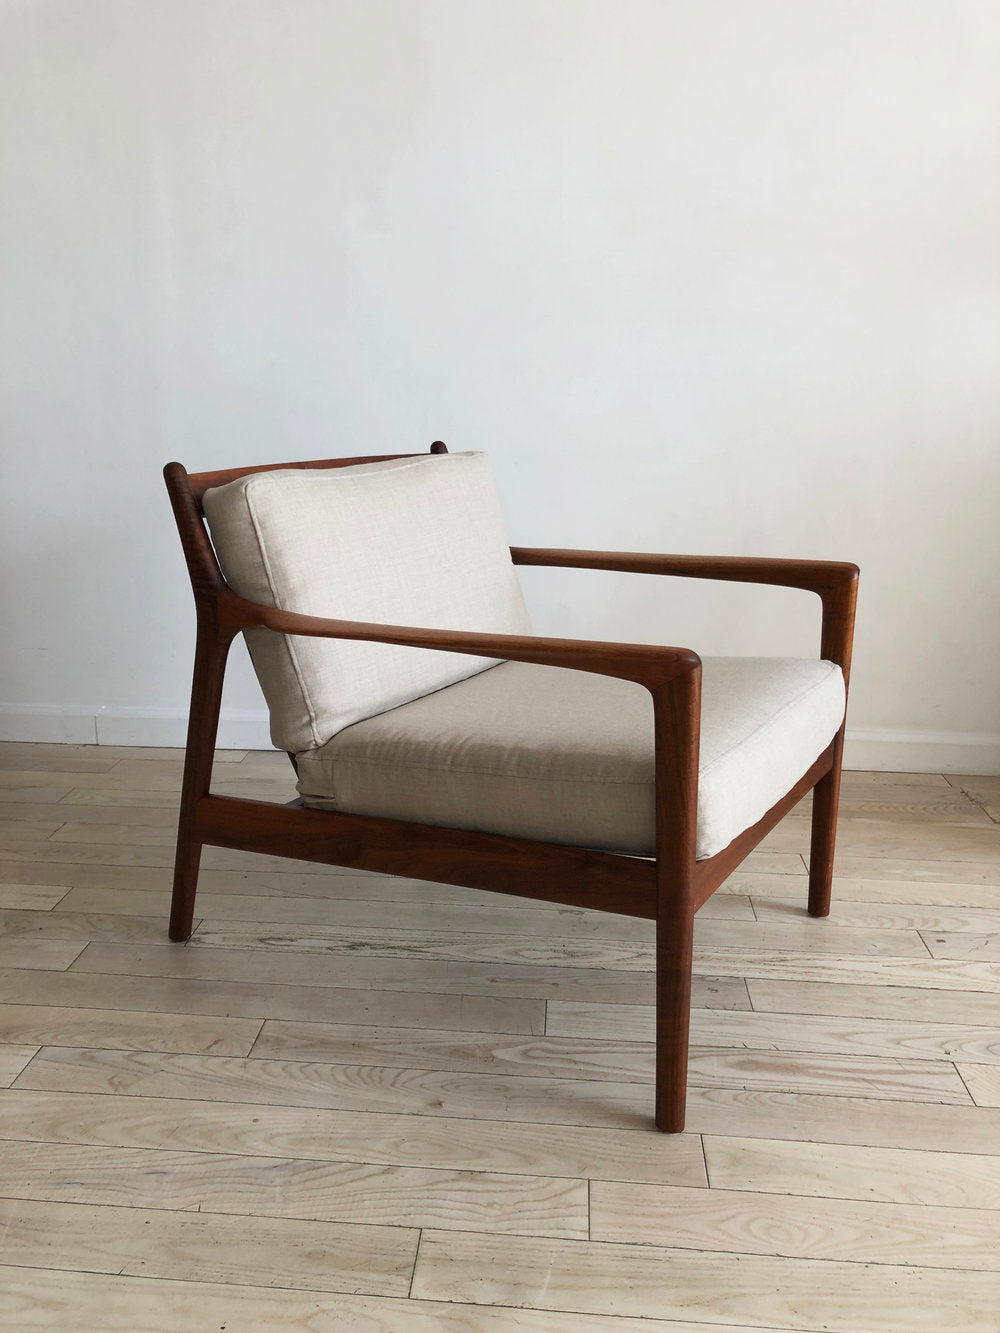 1950s Solid Walnut USA-75 Easy Chair by Folke Ohlsson for Dux Made in Sweden